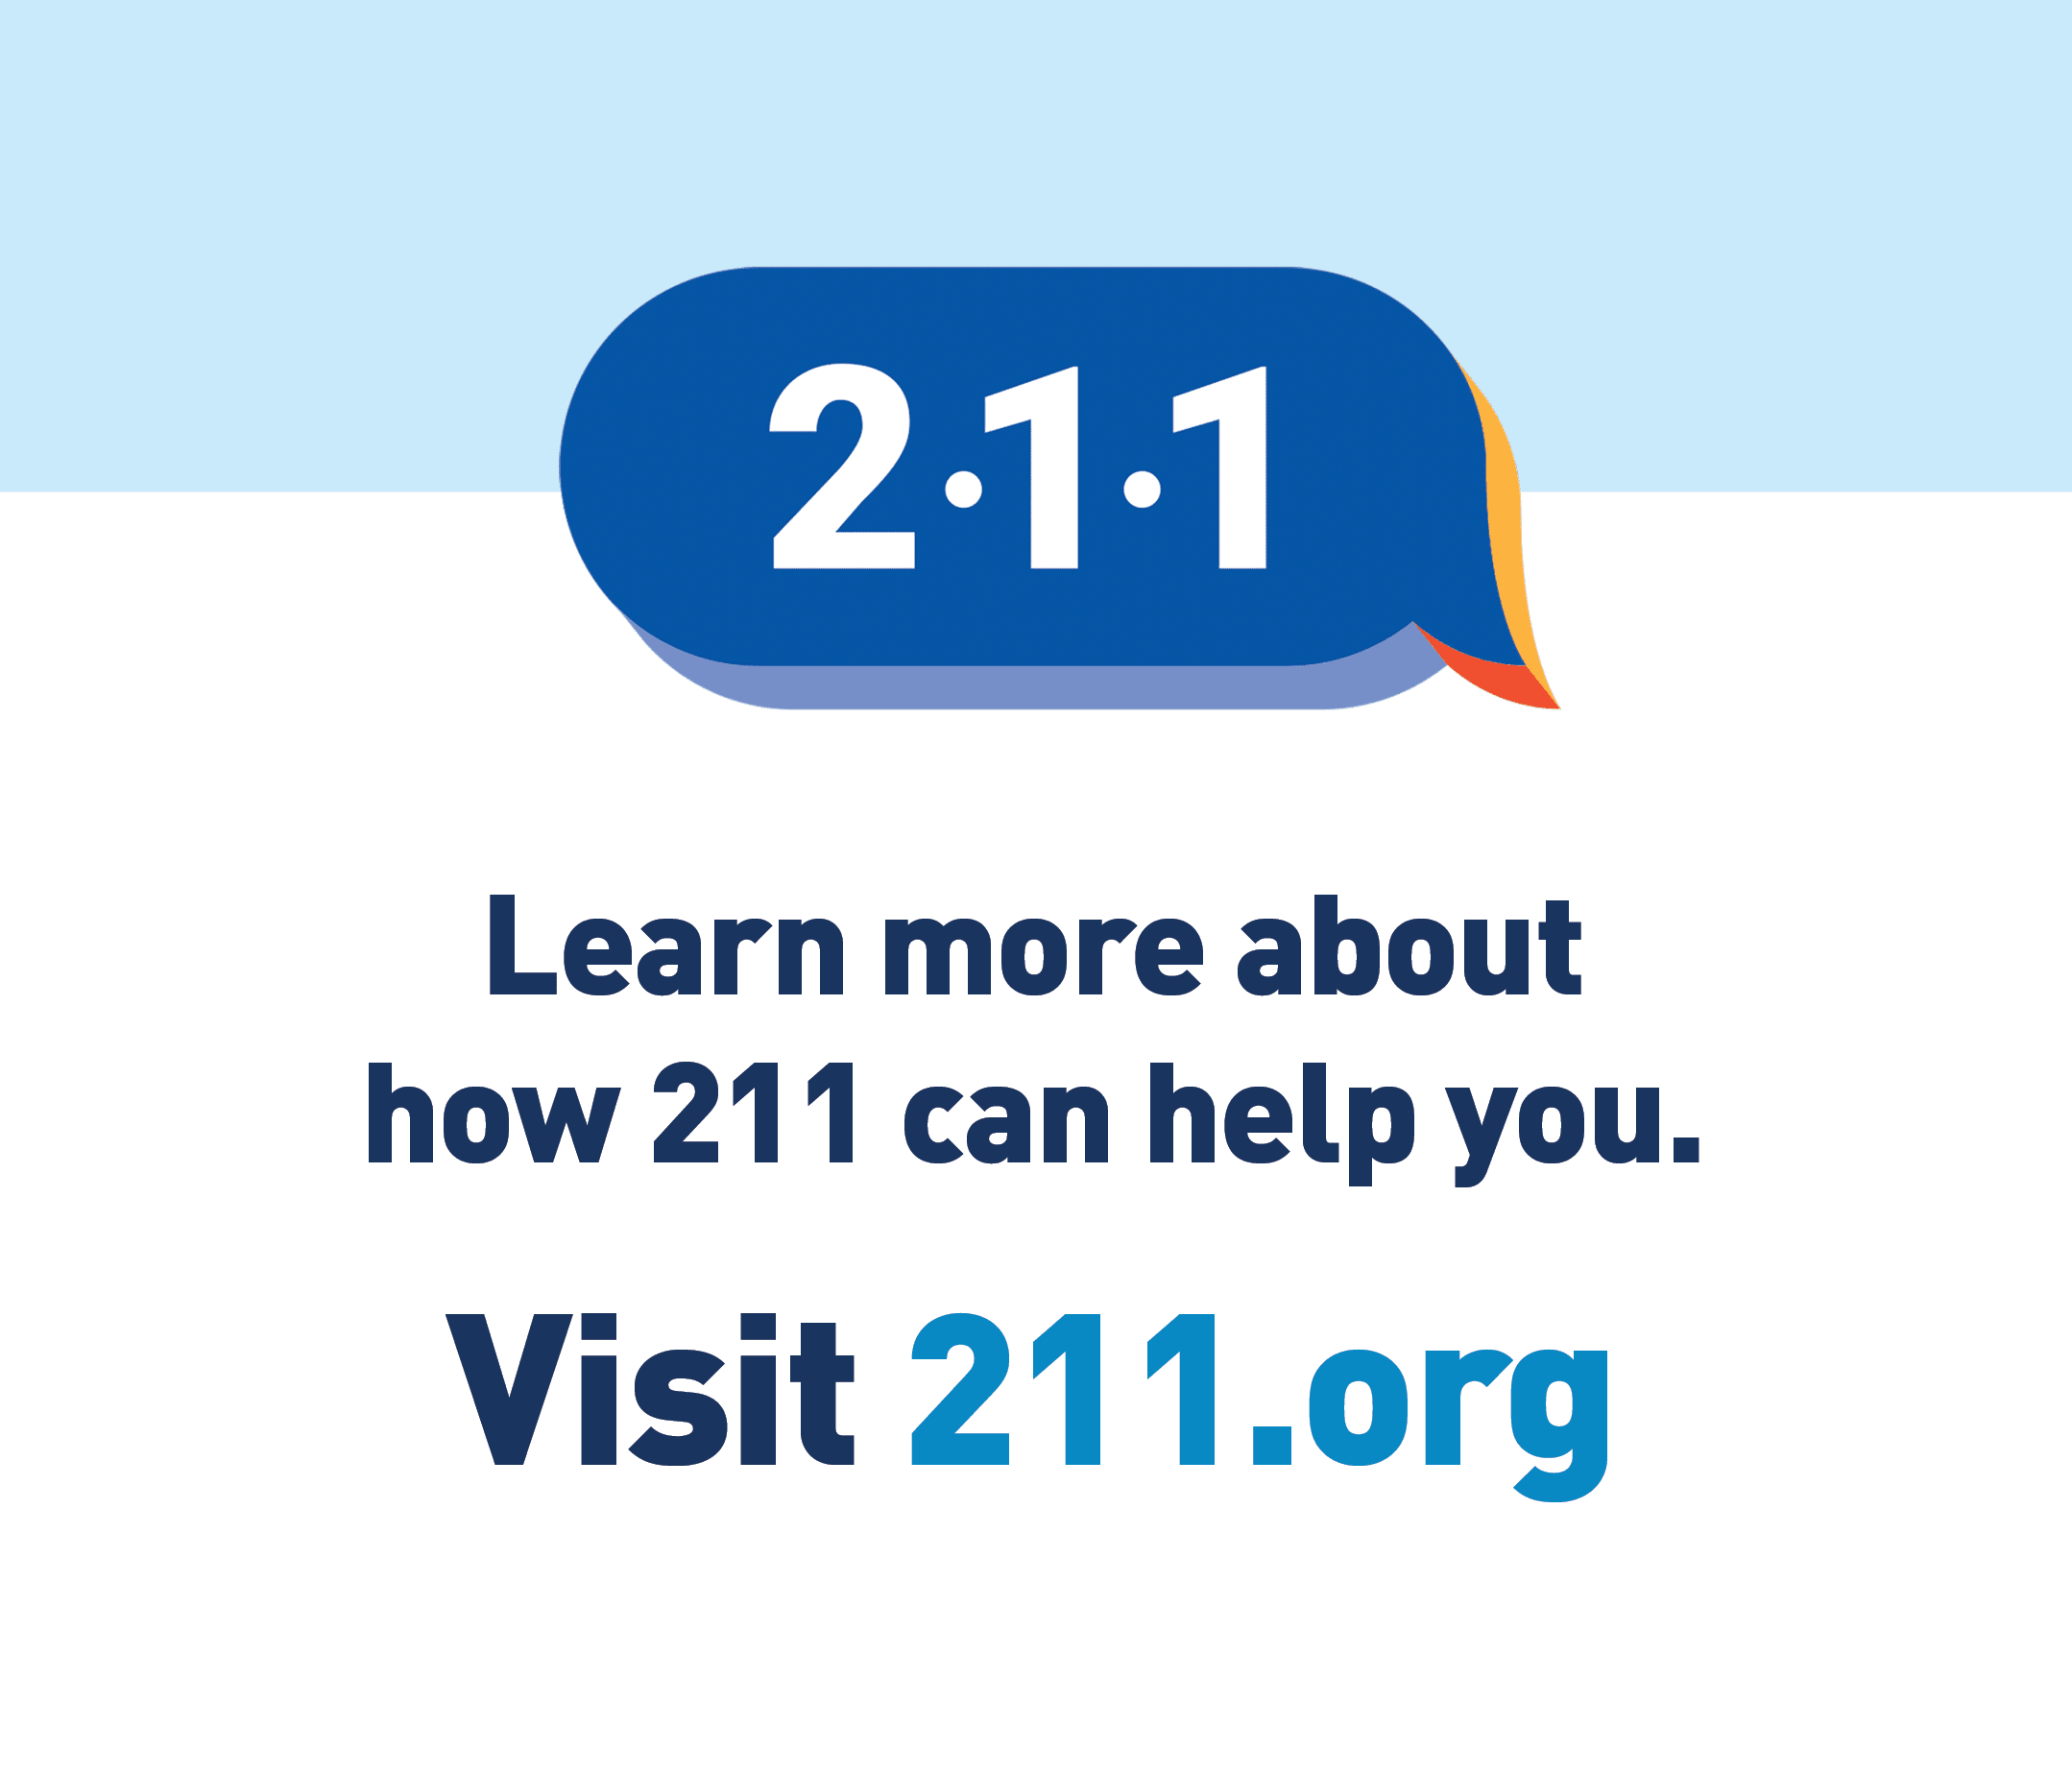 Graphic of a bubble with 211. Text: Learn more about how 211 can help you. Visit 211.org